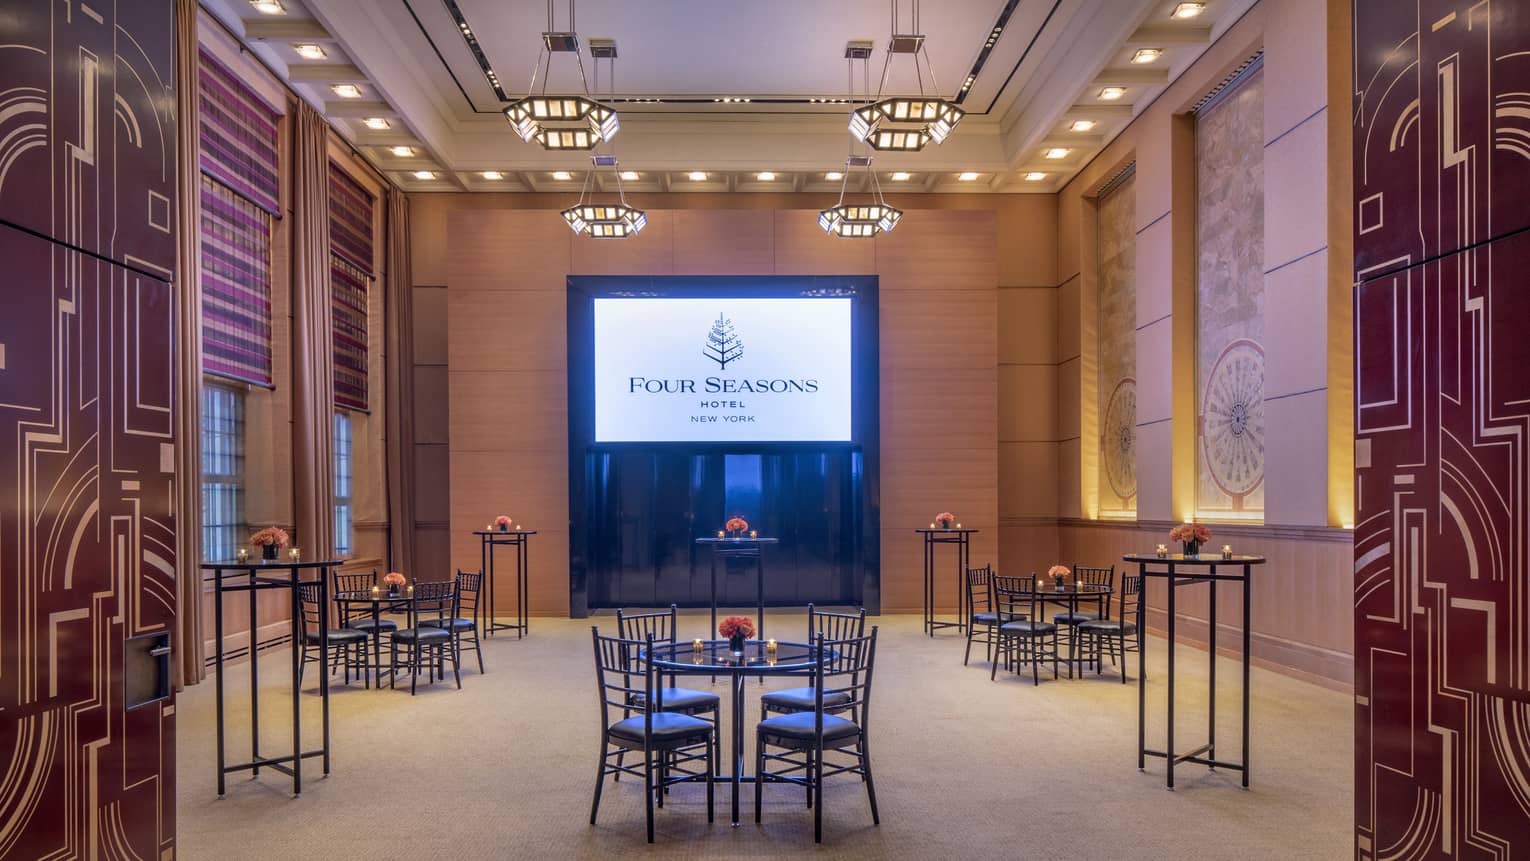 Orante and abstract lines decorate two doors that are opened to reveal a wood-panelled function room with three small black iron tables and chairs facing a presentation screen that shows a slide with the four seasons logo